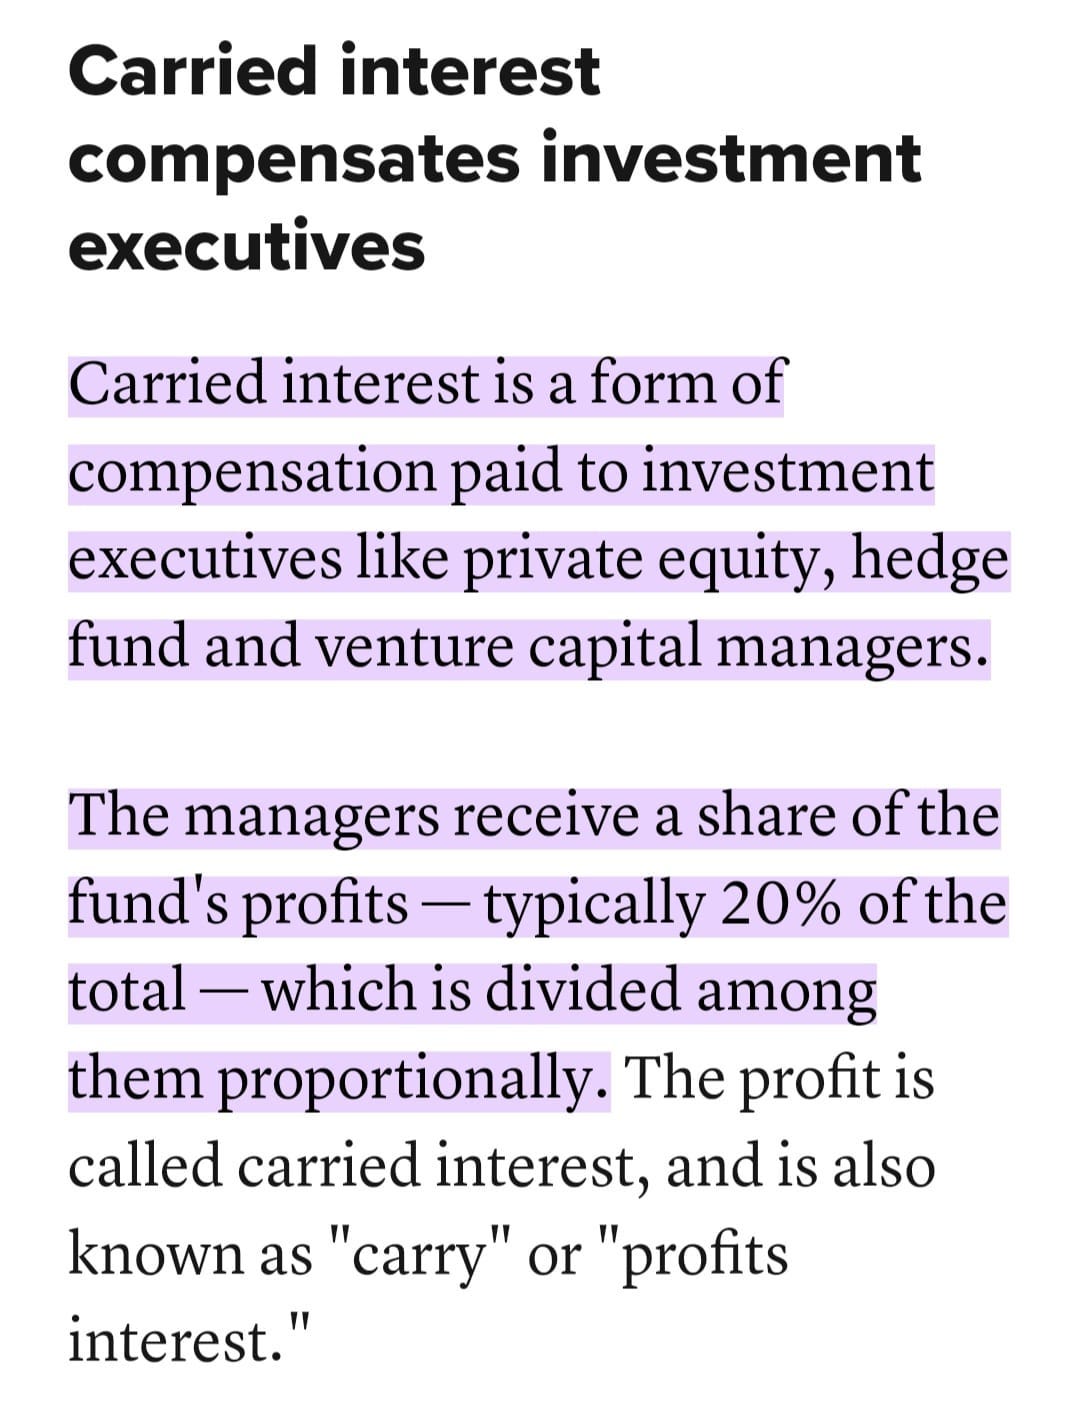 May be an image of text that says 'Carried interest compensates investment executives Carried interest is a form of compensation paid to investment executives like private equity, hedge fund and venture capital managers. The managers receive a shae of the fund's profits typically 20% of the total which is divided among them proportionally The profit is called carried interest, and is also known as "carry" or "profits interest."'